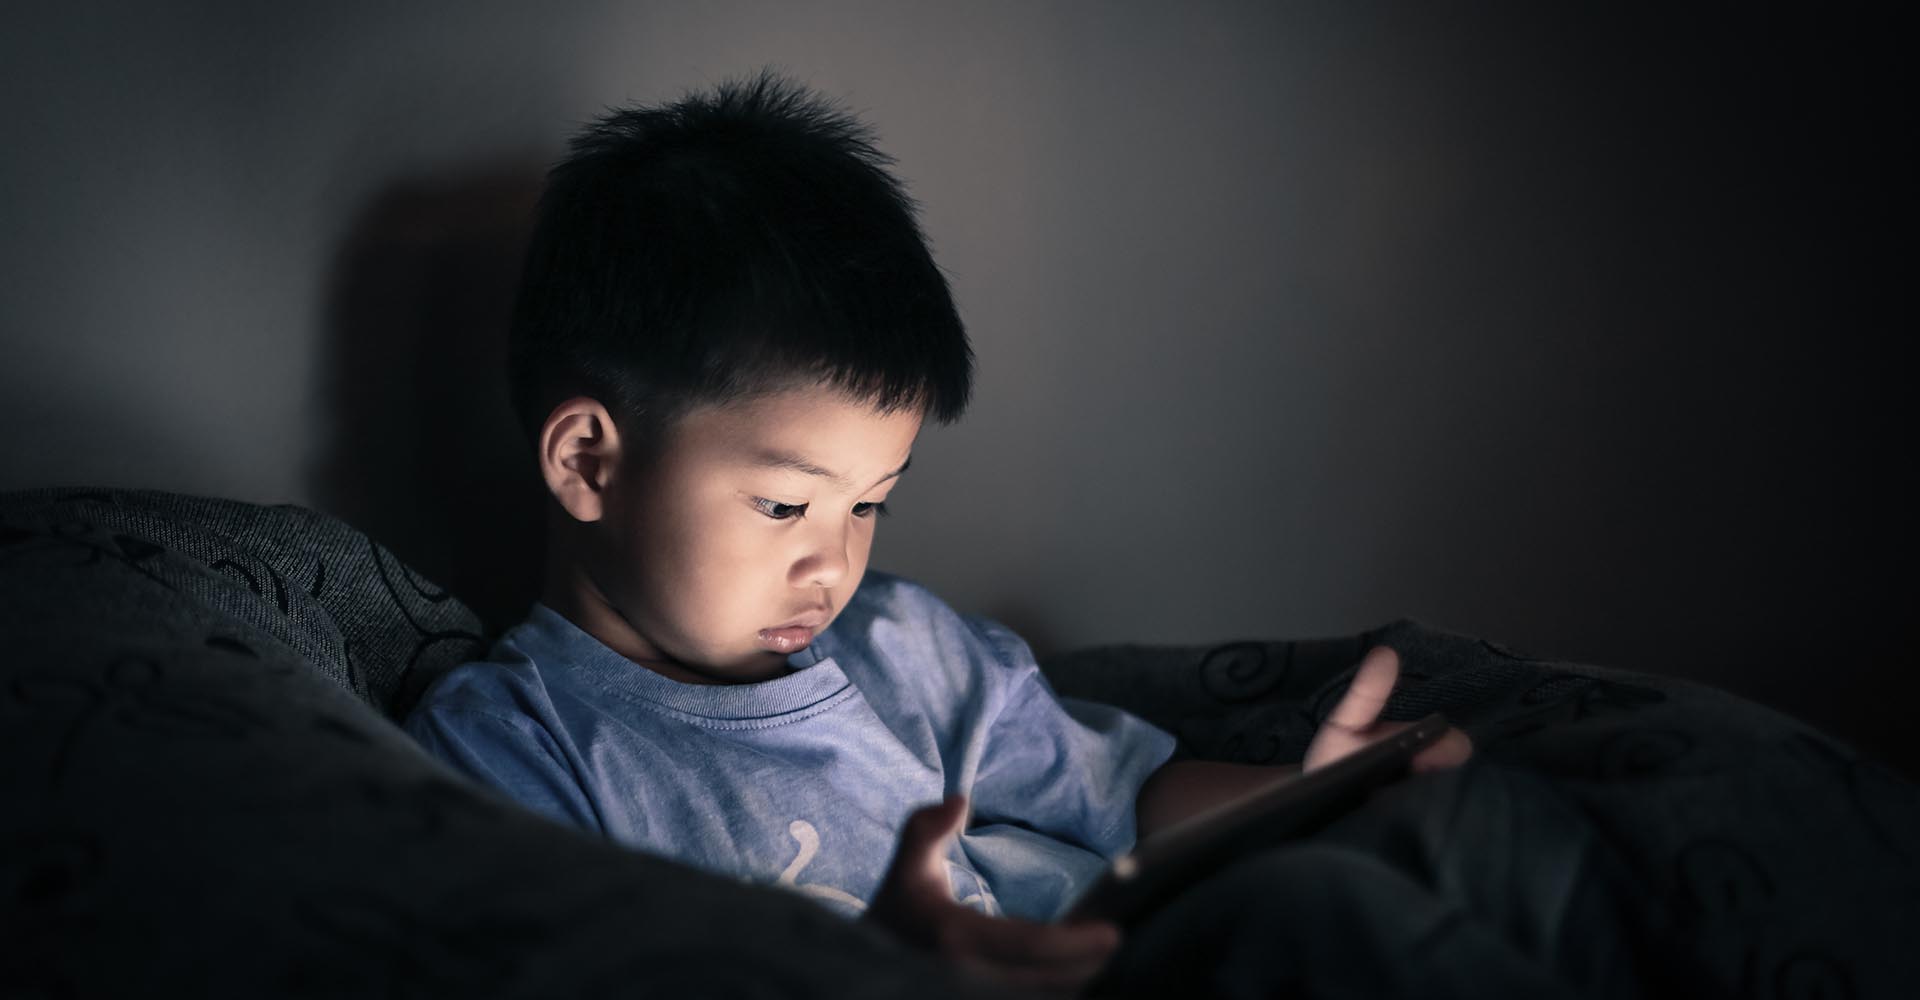 A parent’s guide to screen time